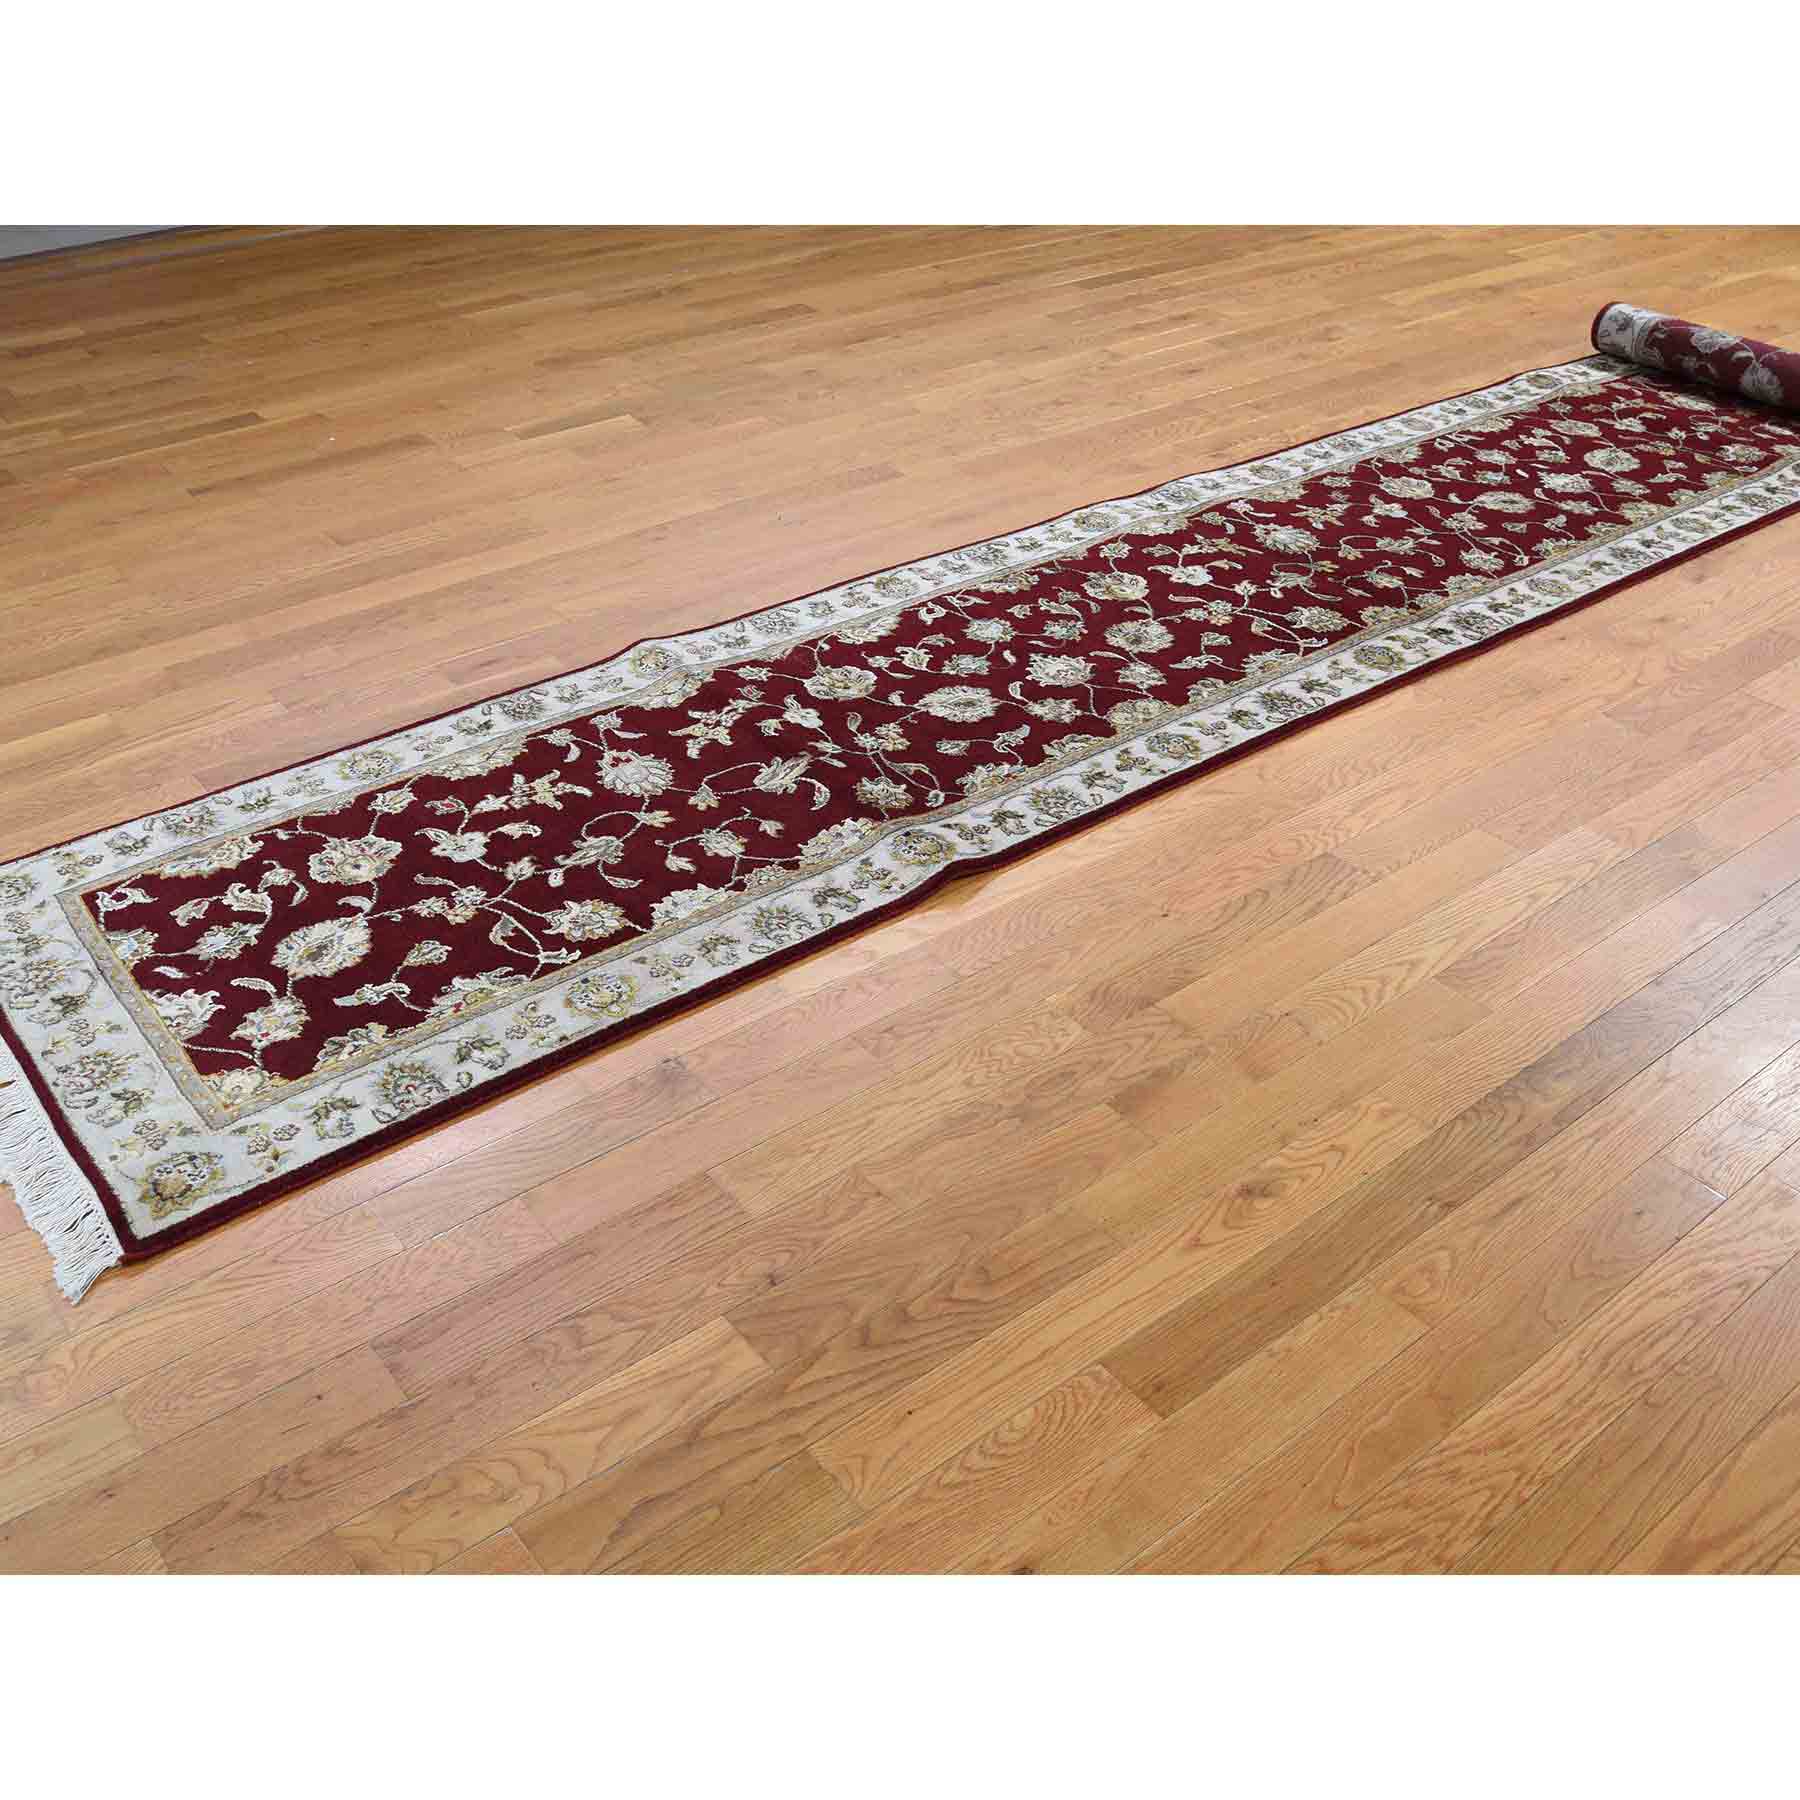 Rajasthan-Hand-Knotted-Rug-213325